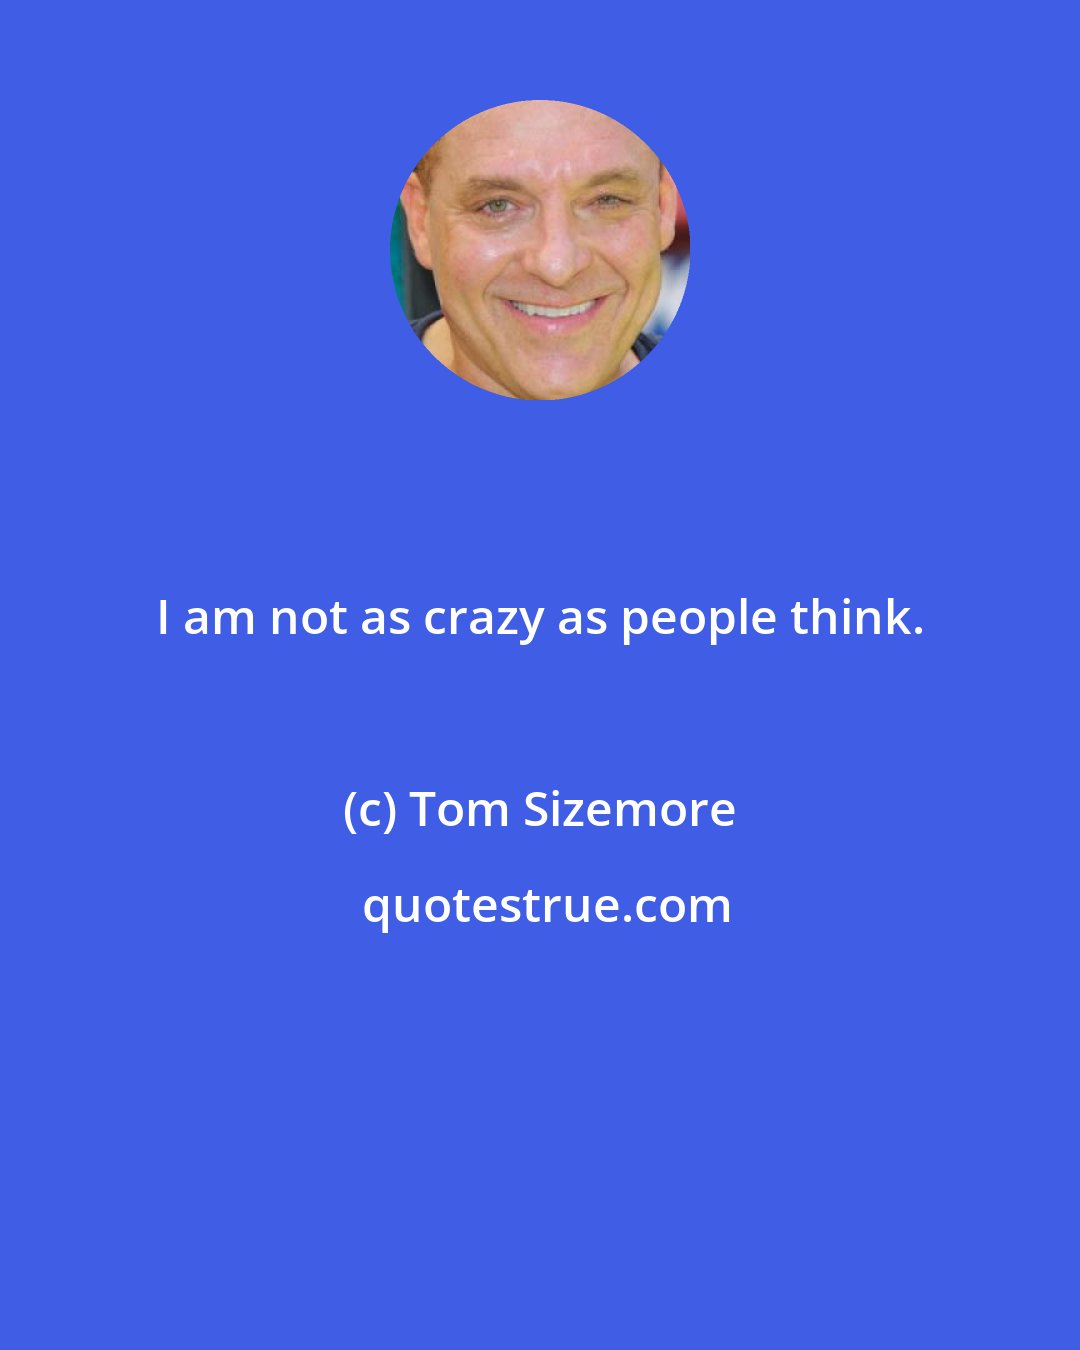 Tom Sizemore: I am not as crazy as people think.